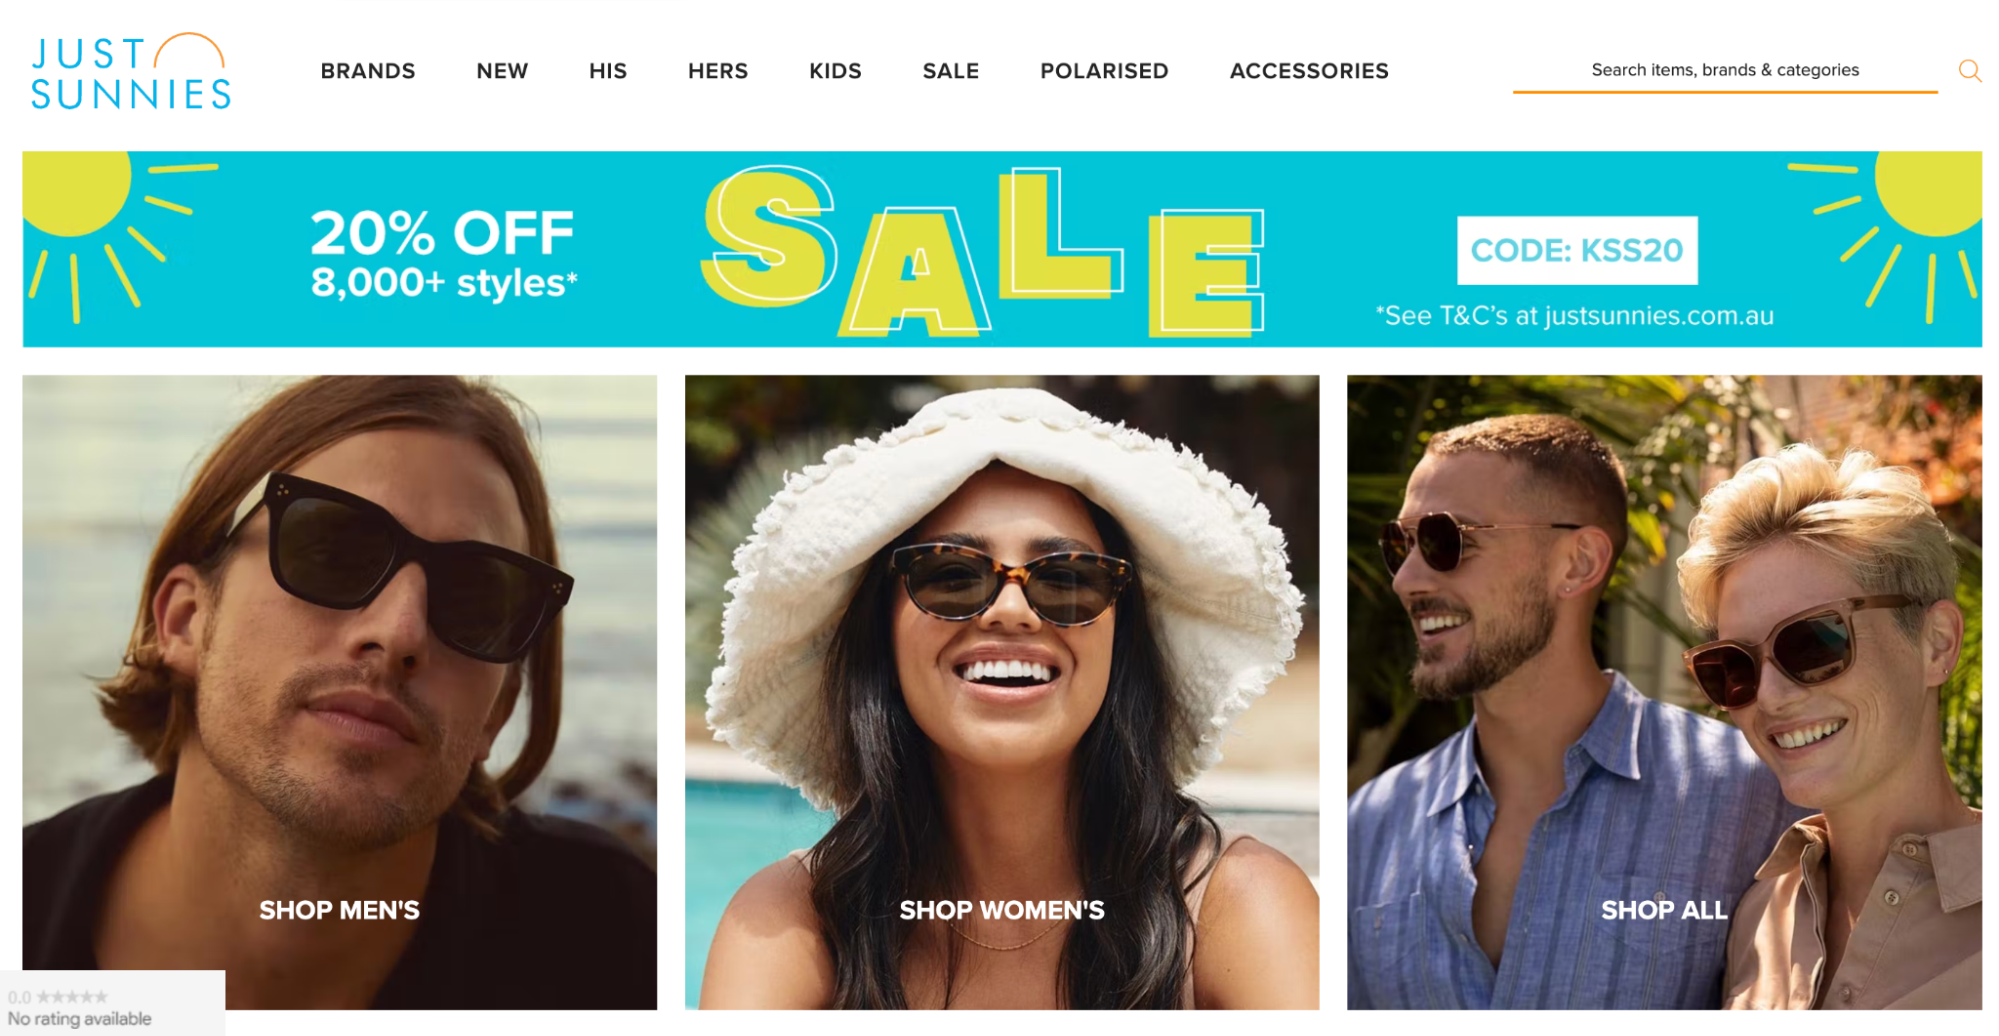 Just Sunnies headless commerce headless commerce examples